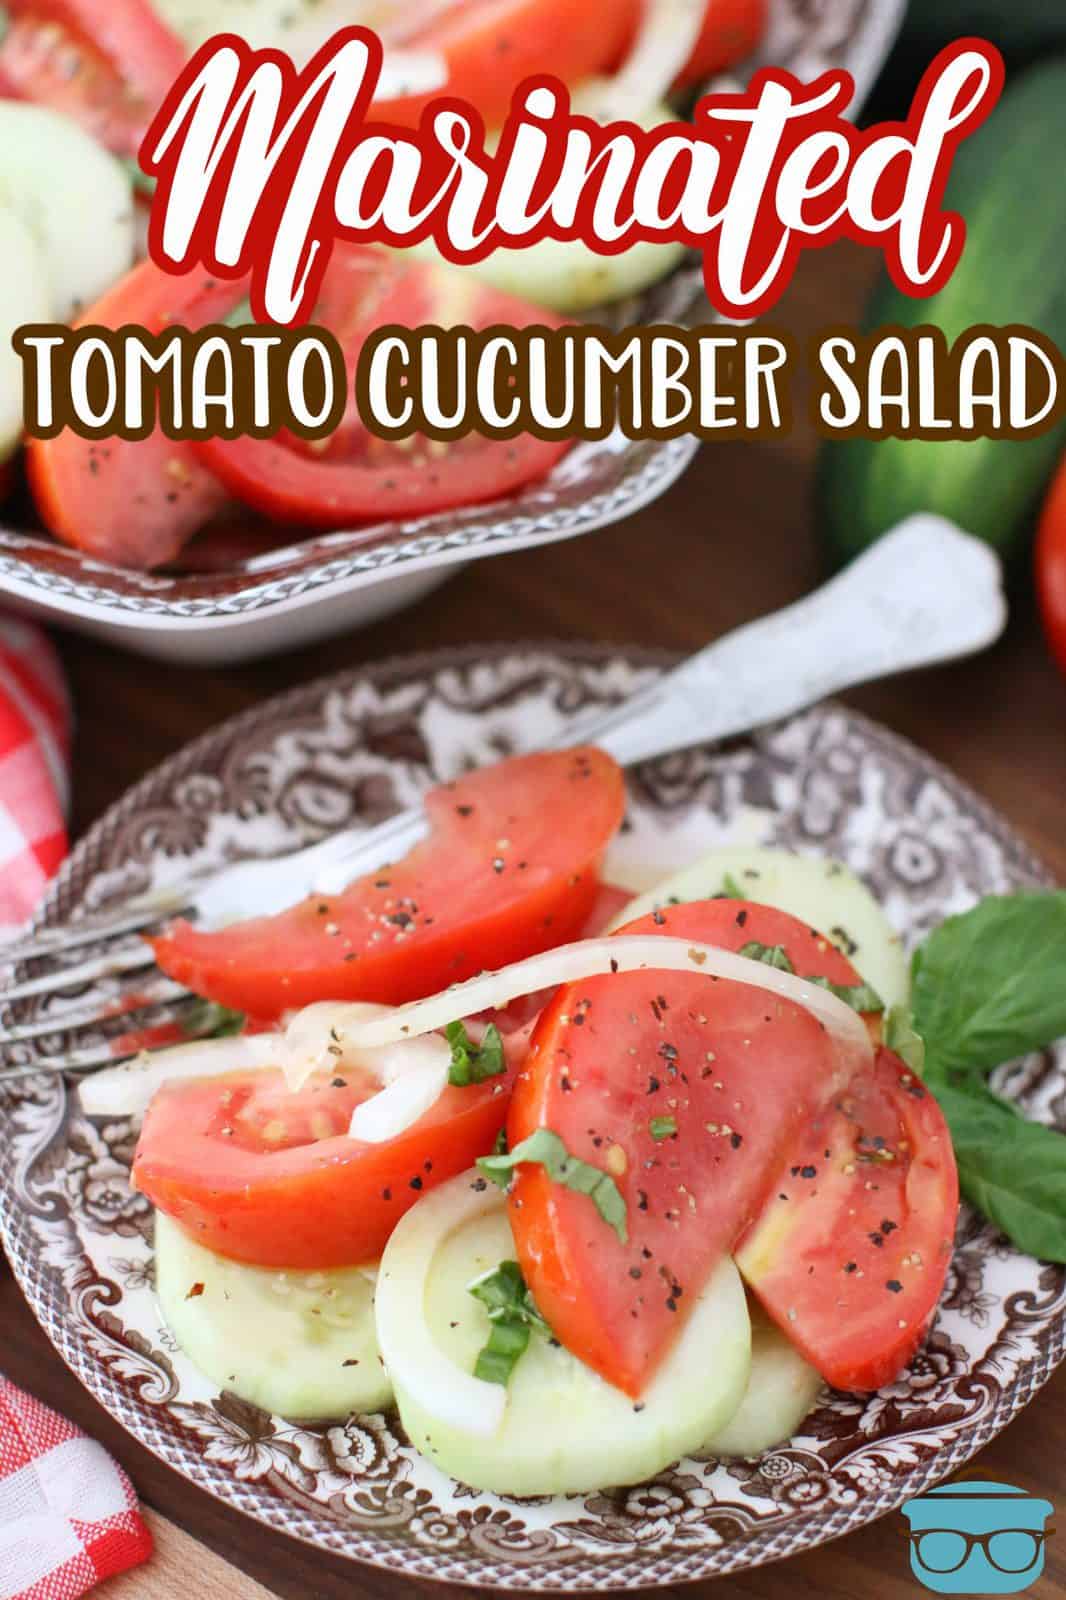 Marinated Tomato Cucumber Salad by The Country Cook - Weekend Potluck 490